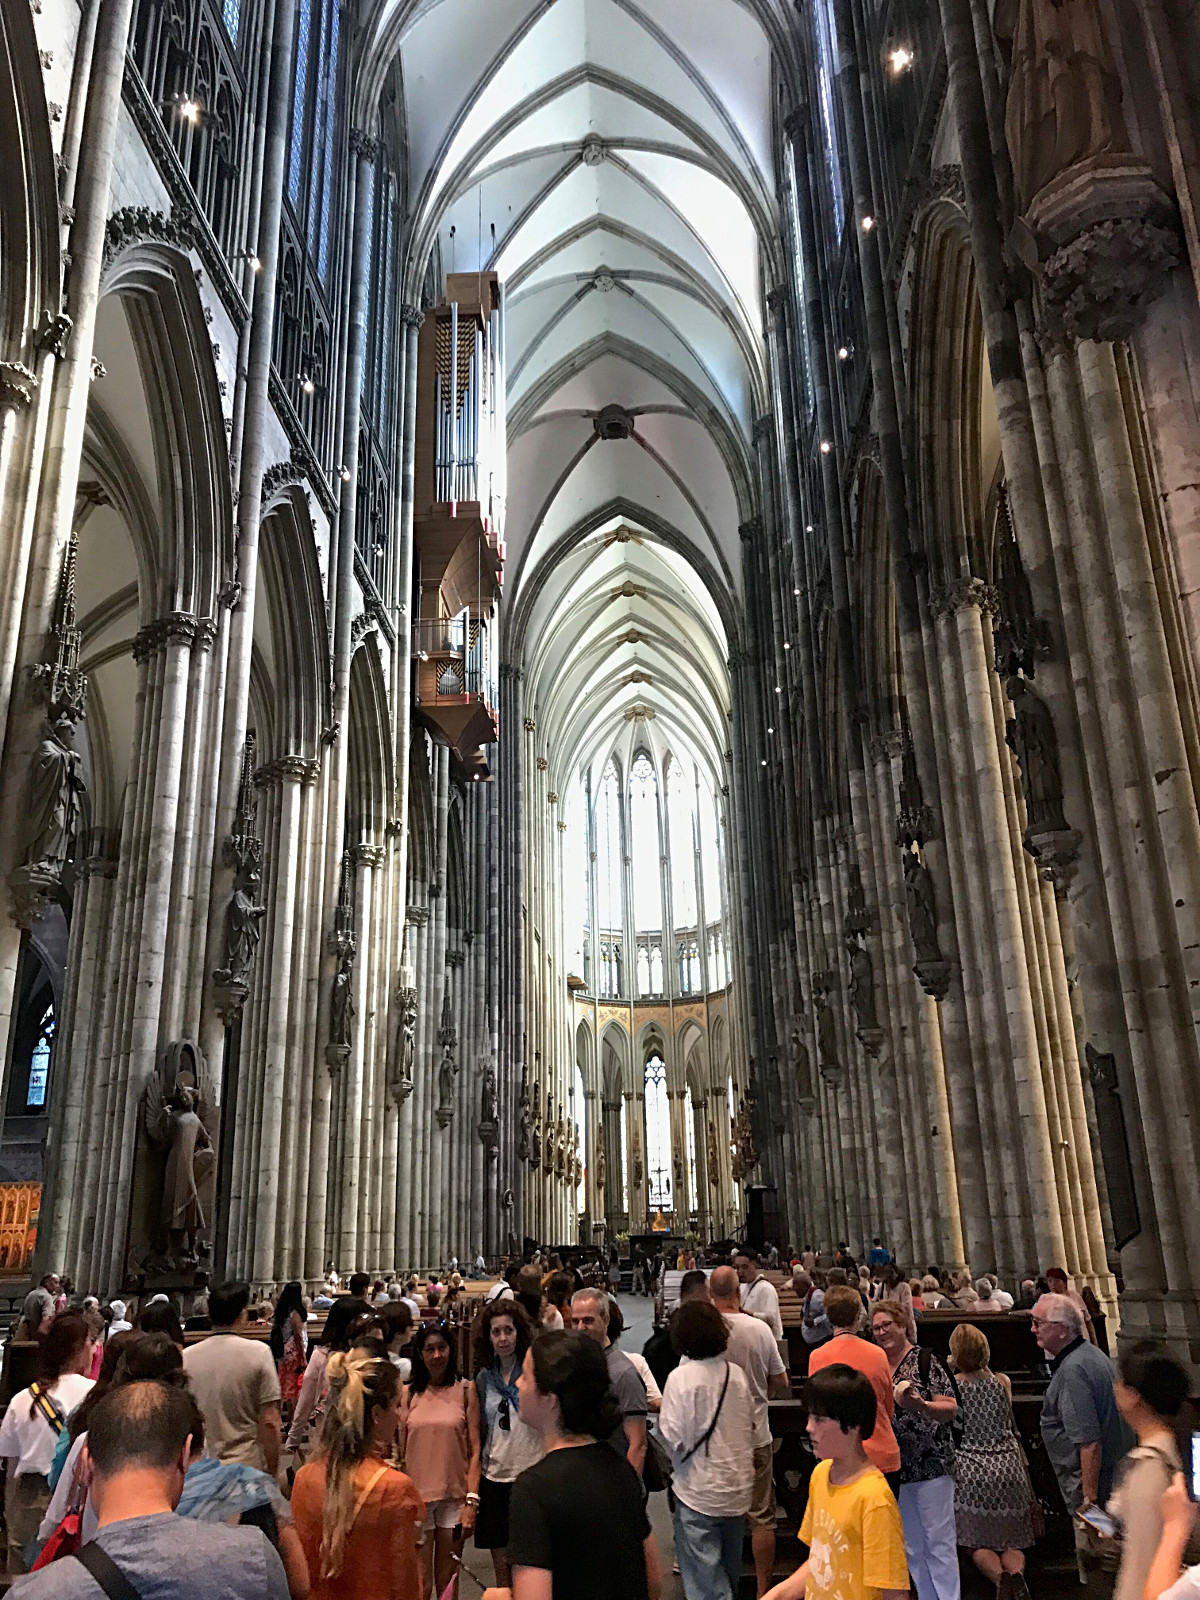 Image of the interior of Koln Cathedral